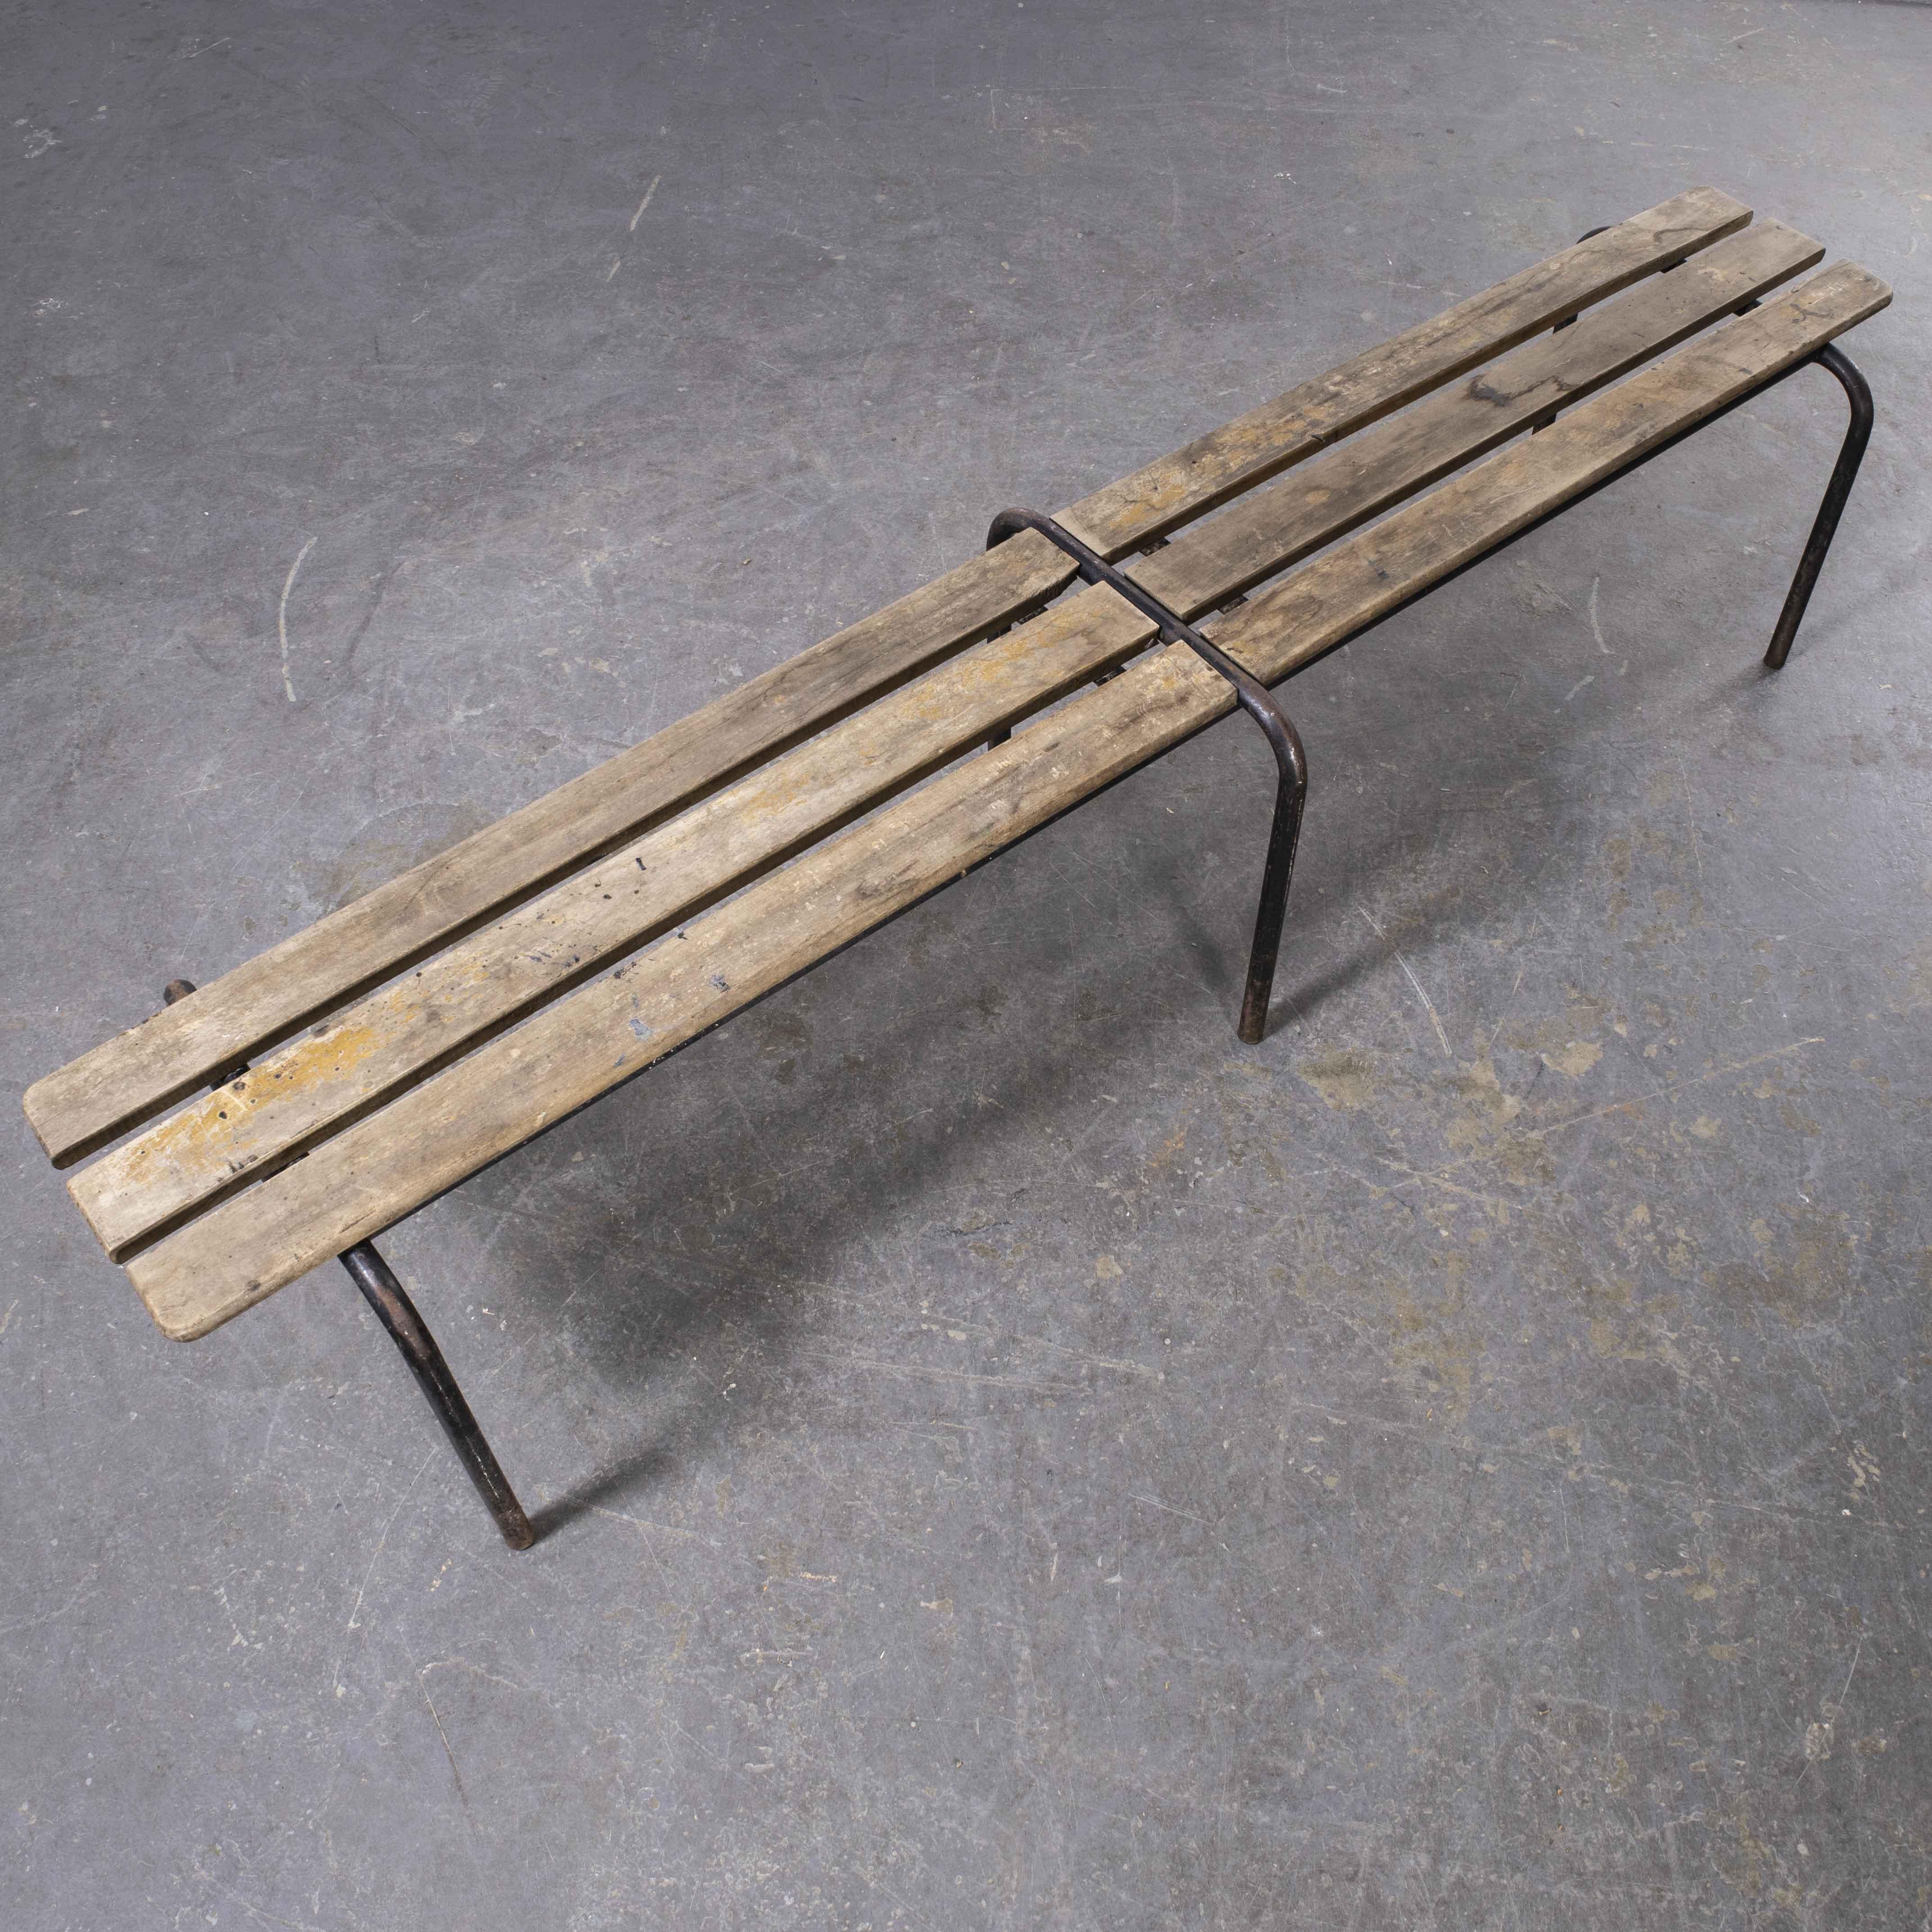 1940’s Original French Mullca long slatted bench(Model 683)
1940’s Original French Mullca long slatted bench (Model 681). One of our most favourite makers, in 1947 Robert Muller and Gaston Cavaillon created the company Mullca that went on to